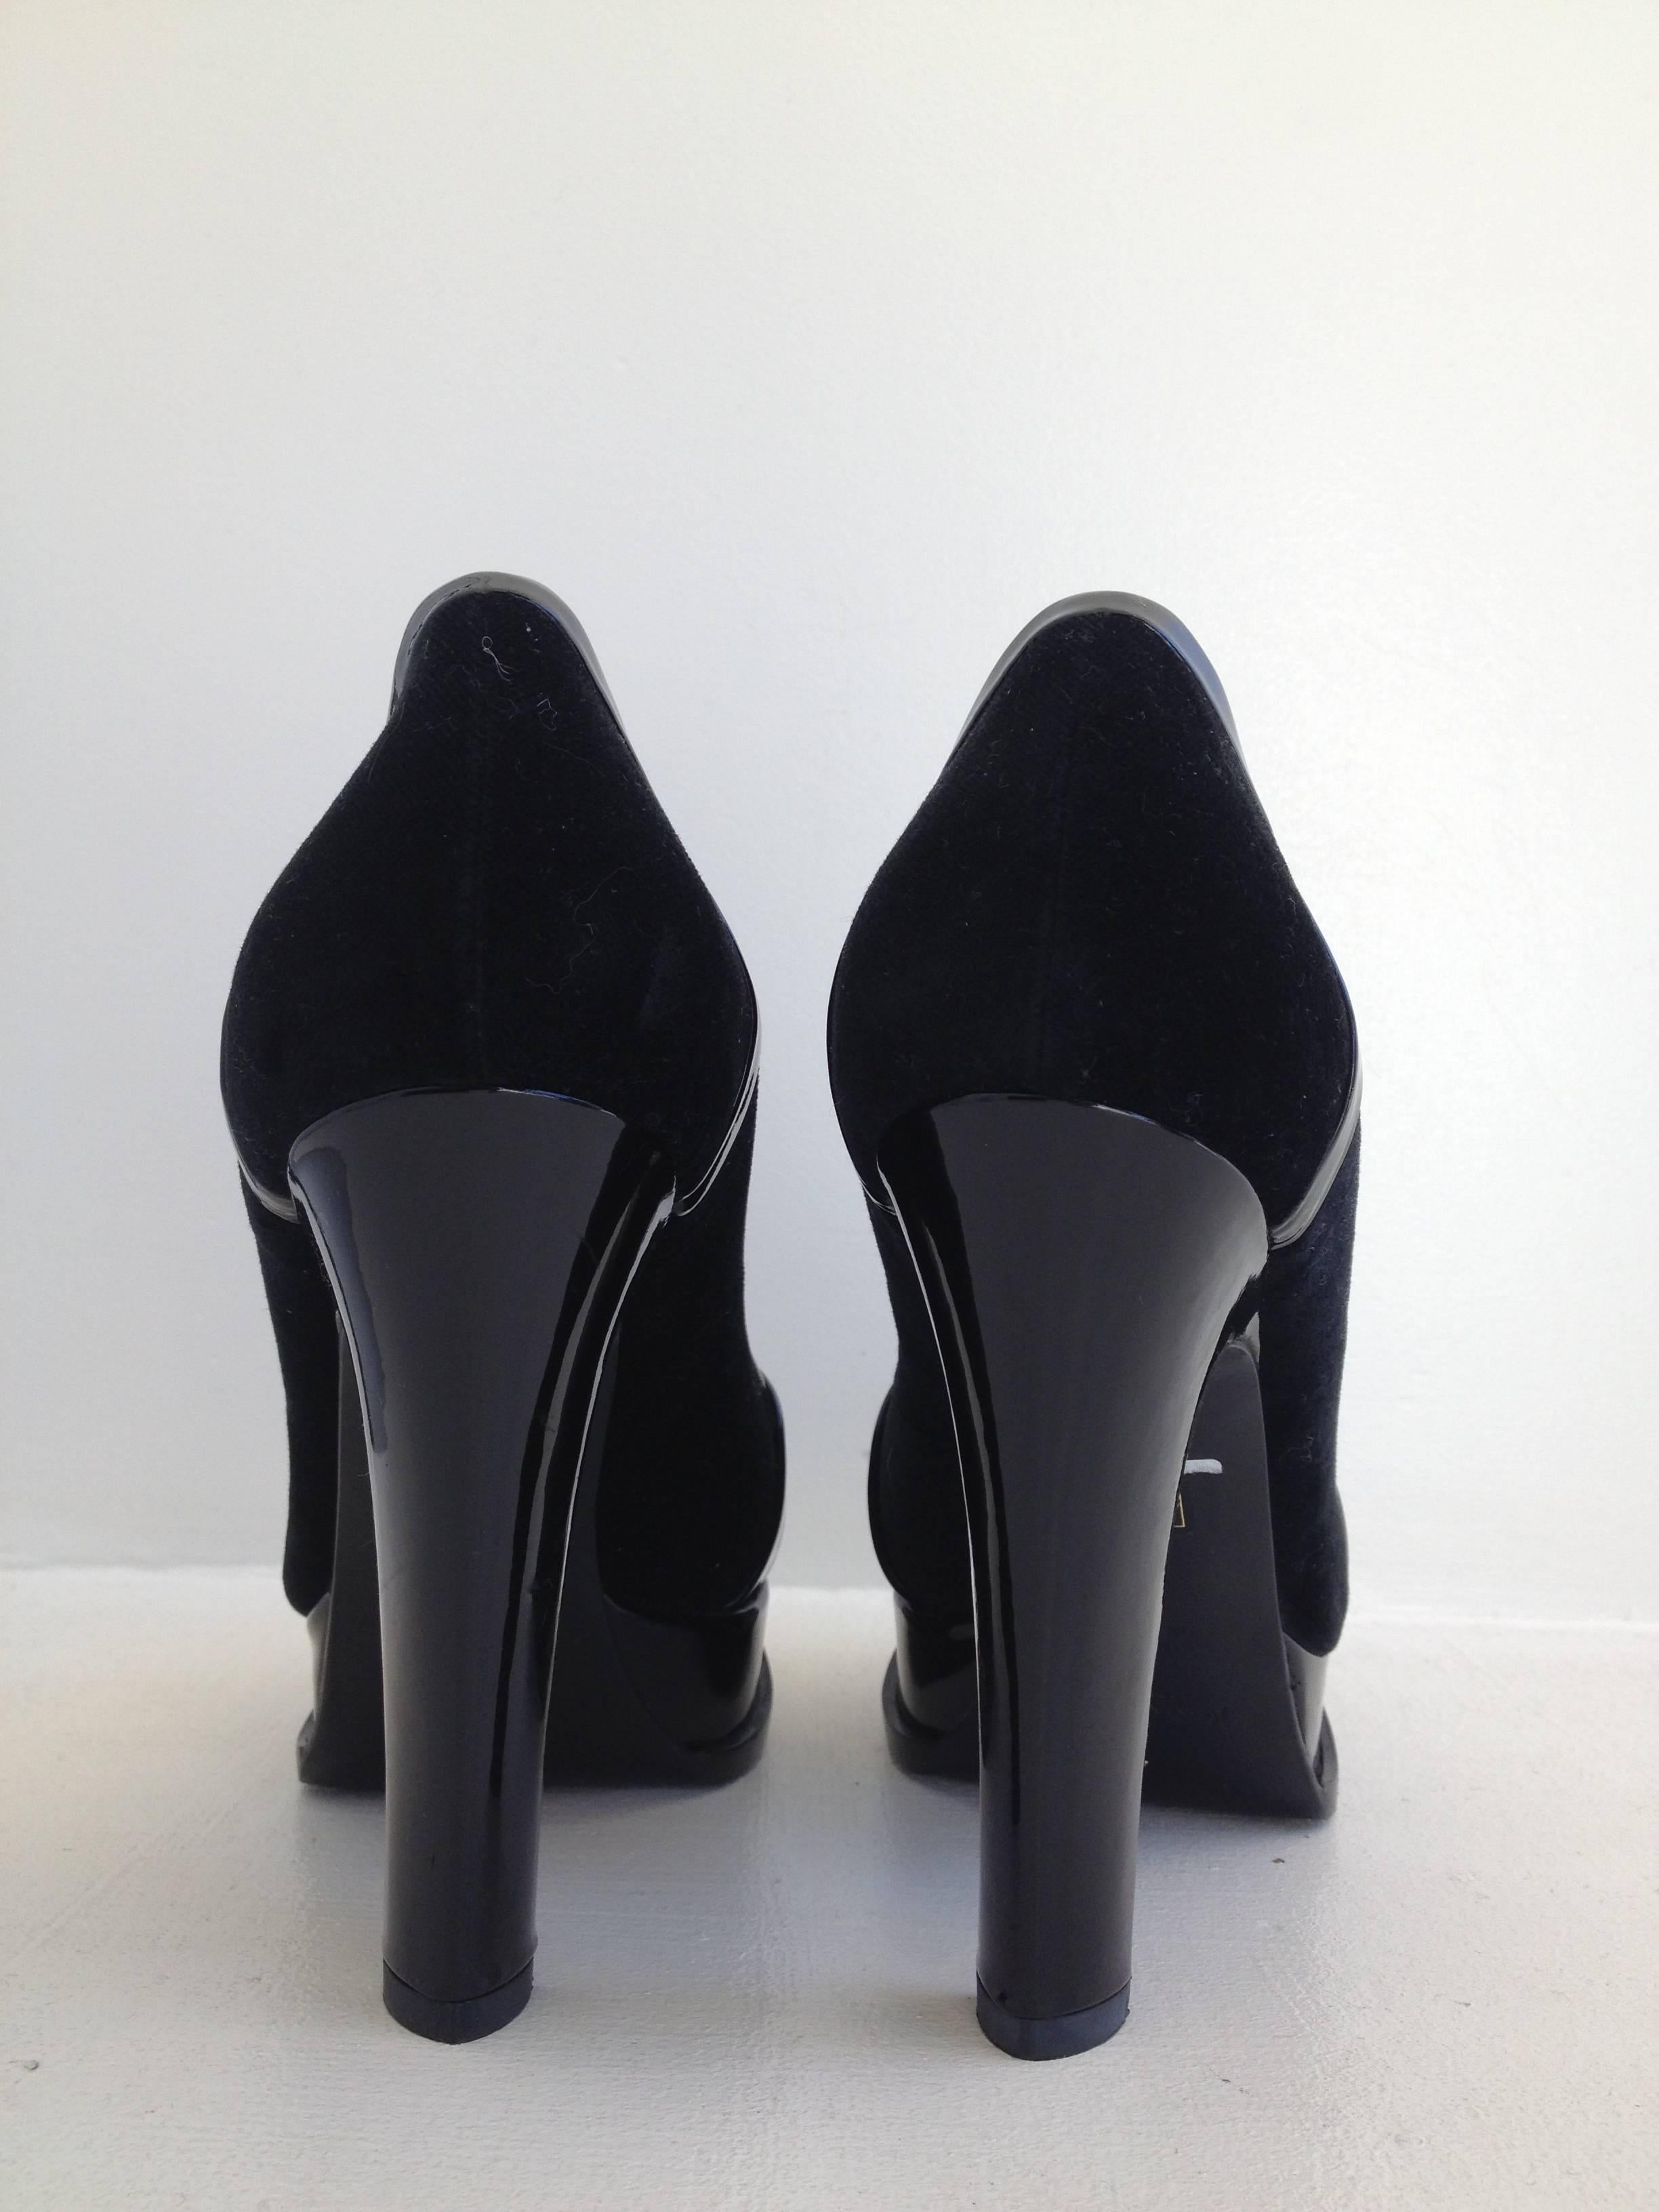 Yves Saint Laurent Black Velvet and Patent High Heel Loafers Size 36.5 (6) In New Condition For Sale In San Francisco, CA